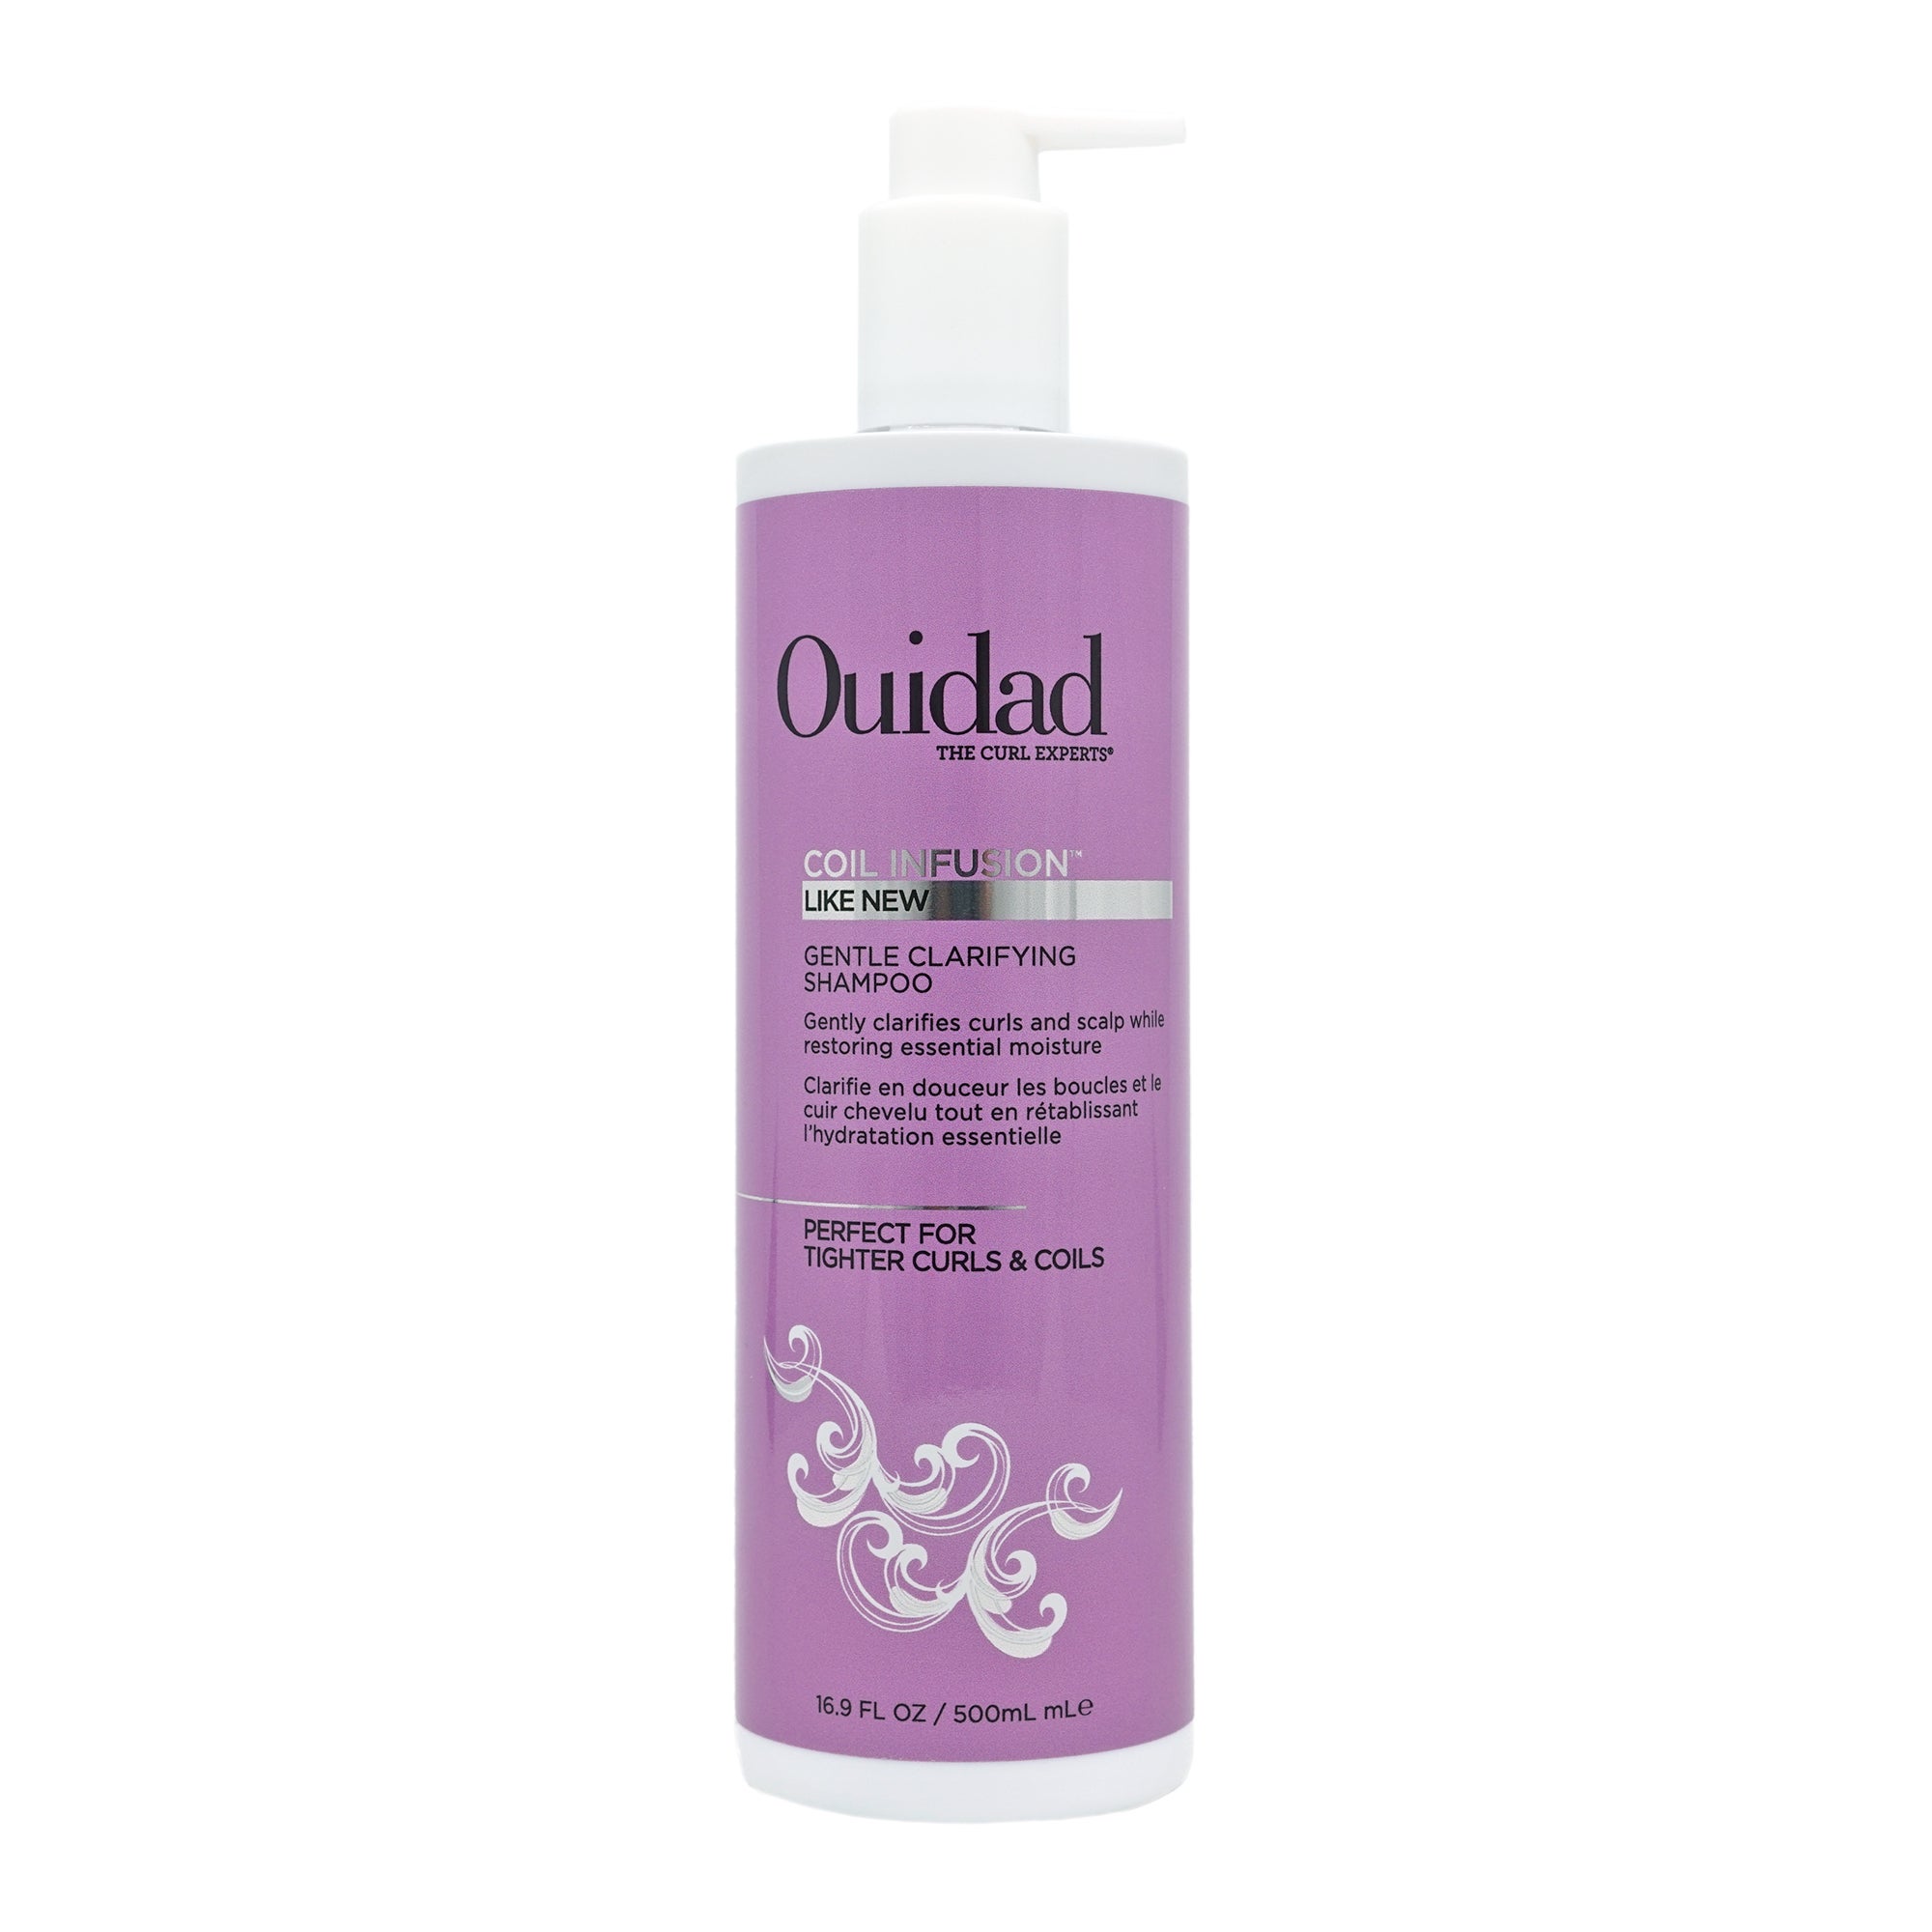 If Your Curls Need More Moisture, Ouidad's New Coil Infusion Collection Is A Dream Come True